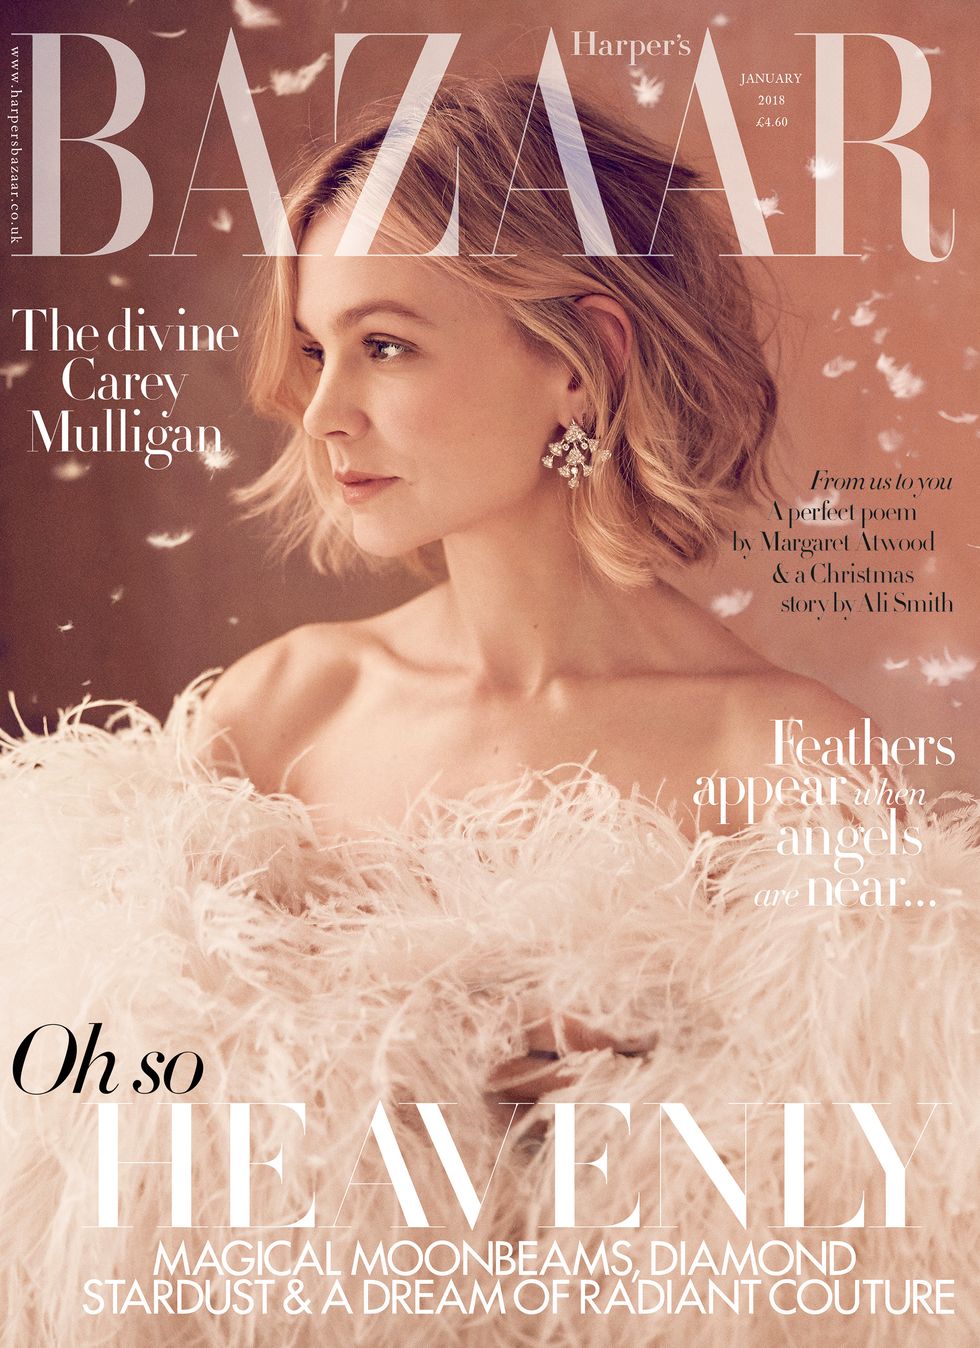 Carey Mulligan on the January - Christmas/New Year 2018 issue of Harper's Bazaar